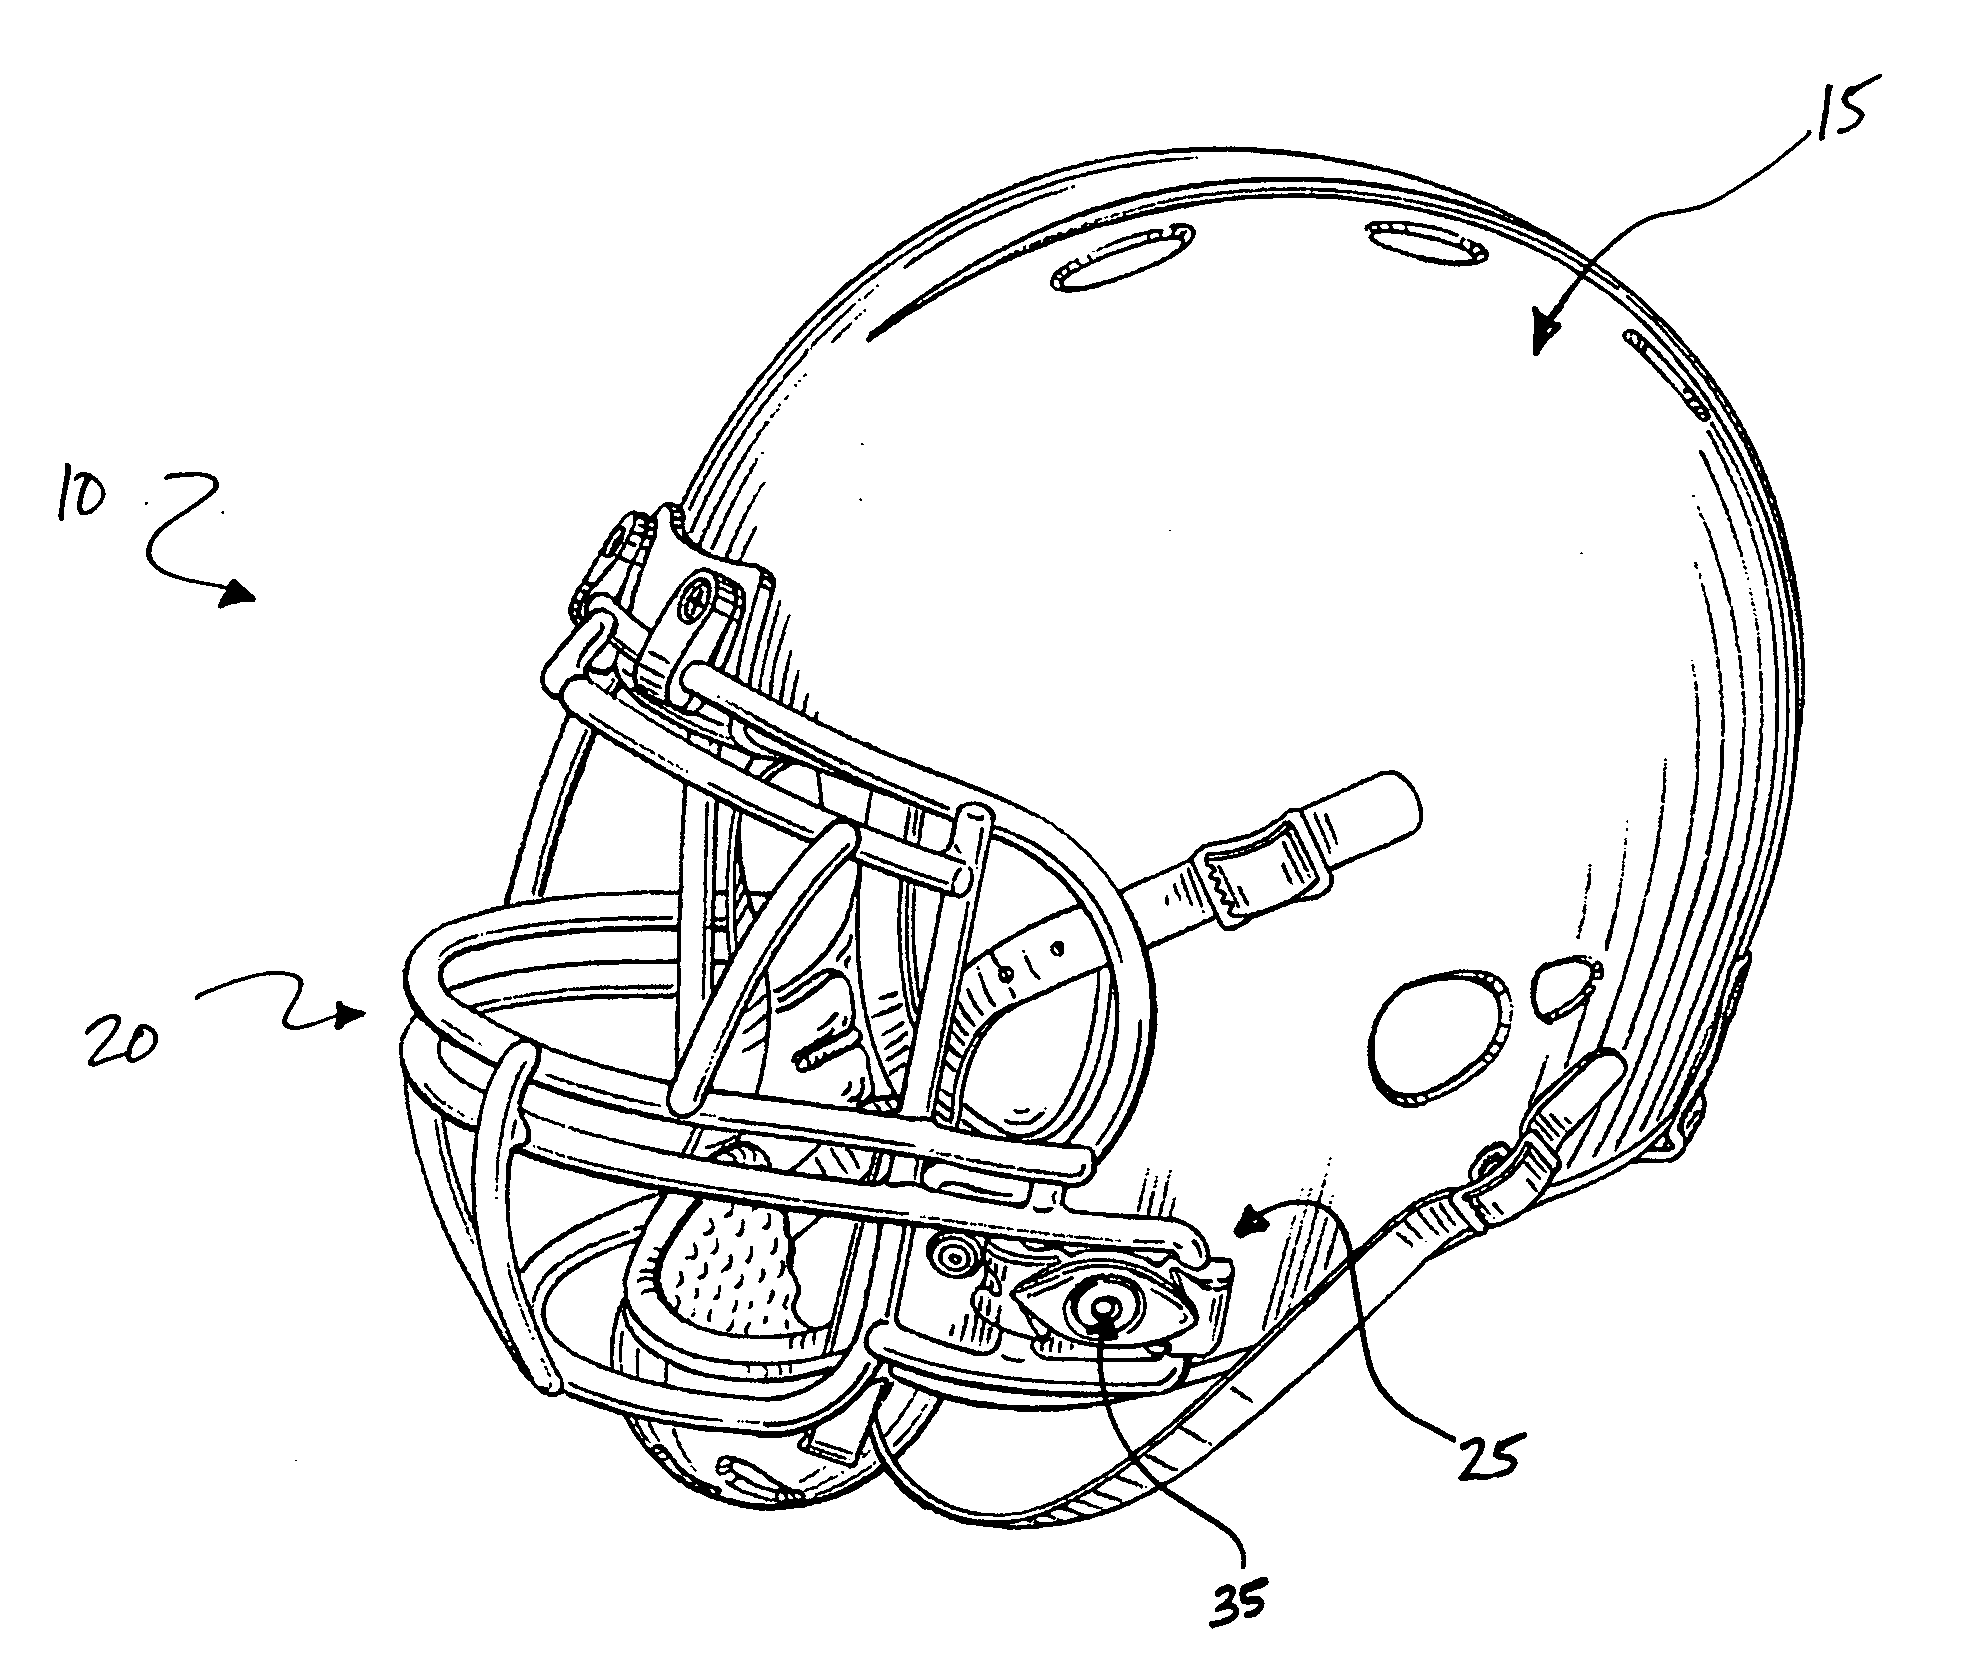 Sports helmet with quick-release faceguard connector and adjustable internal pad element